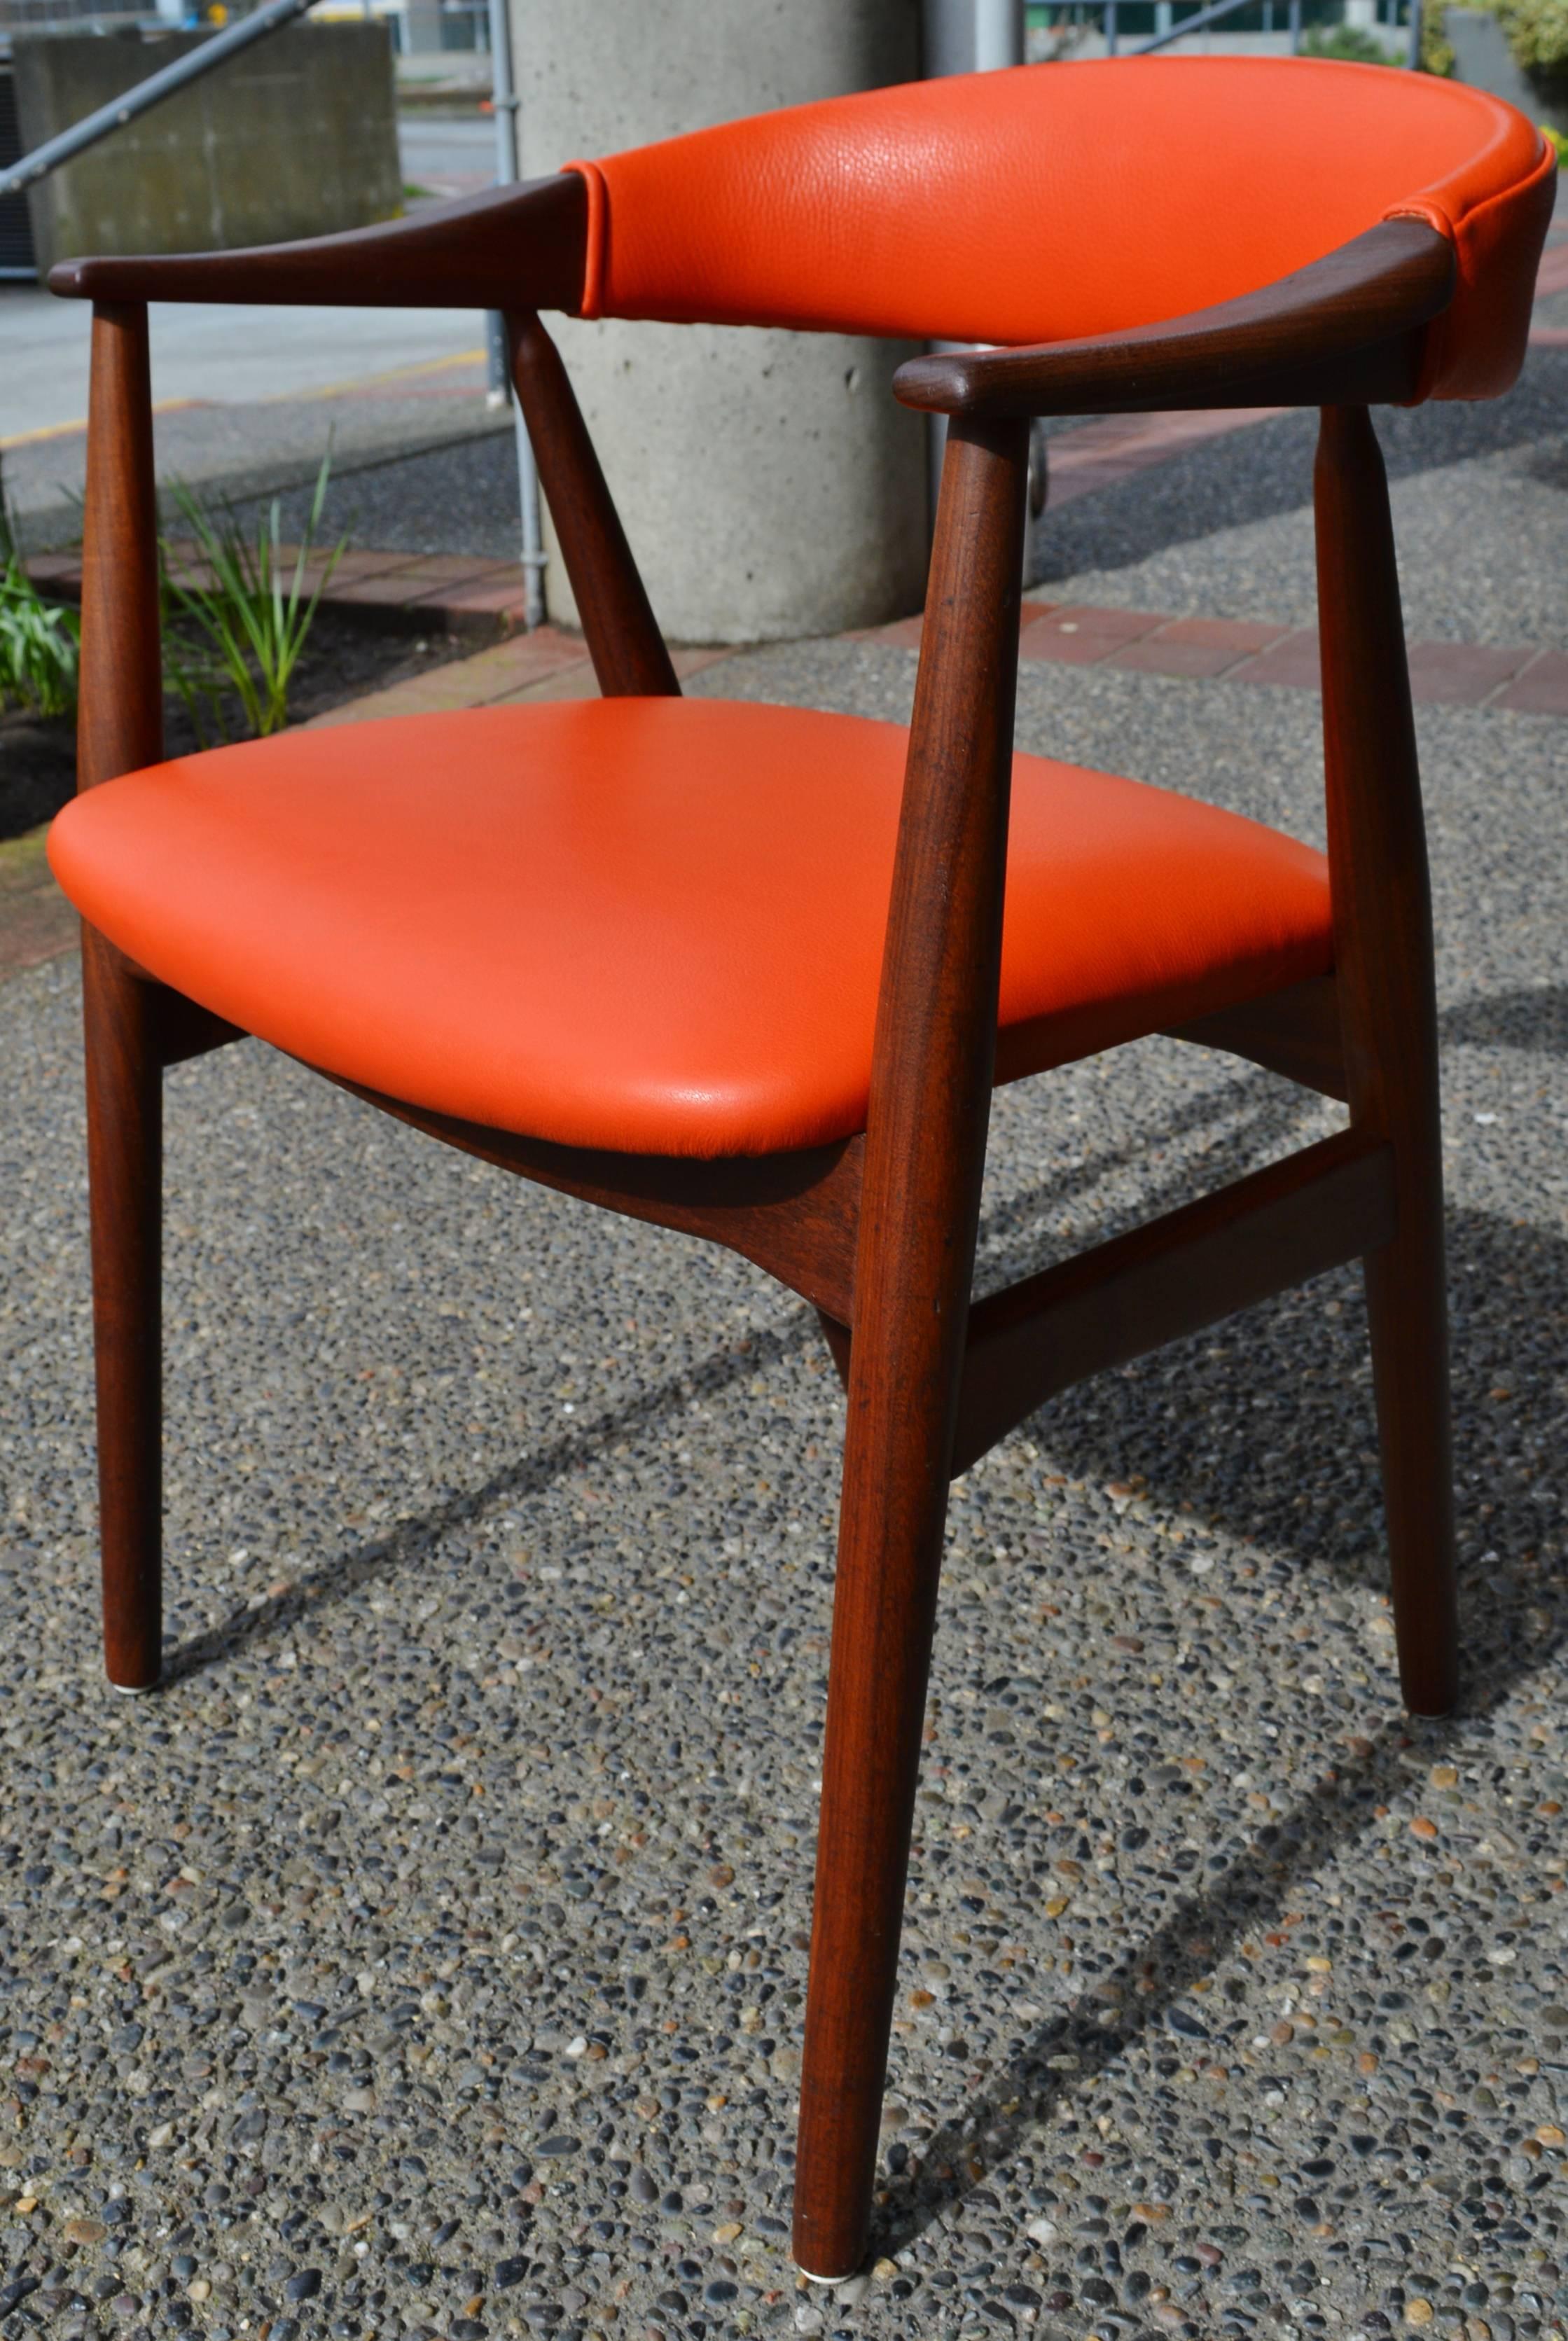 Mid-20th Century Orange Leather Kai Kristiansen Curved Back Desk or Side Chair